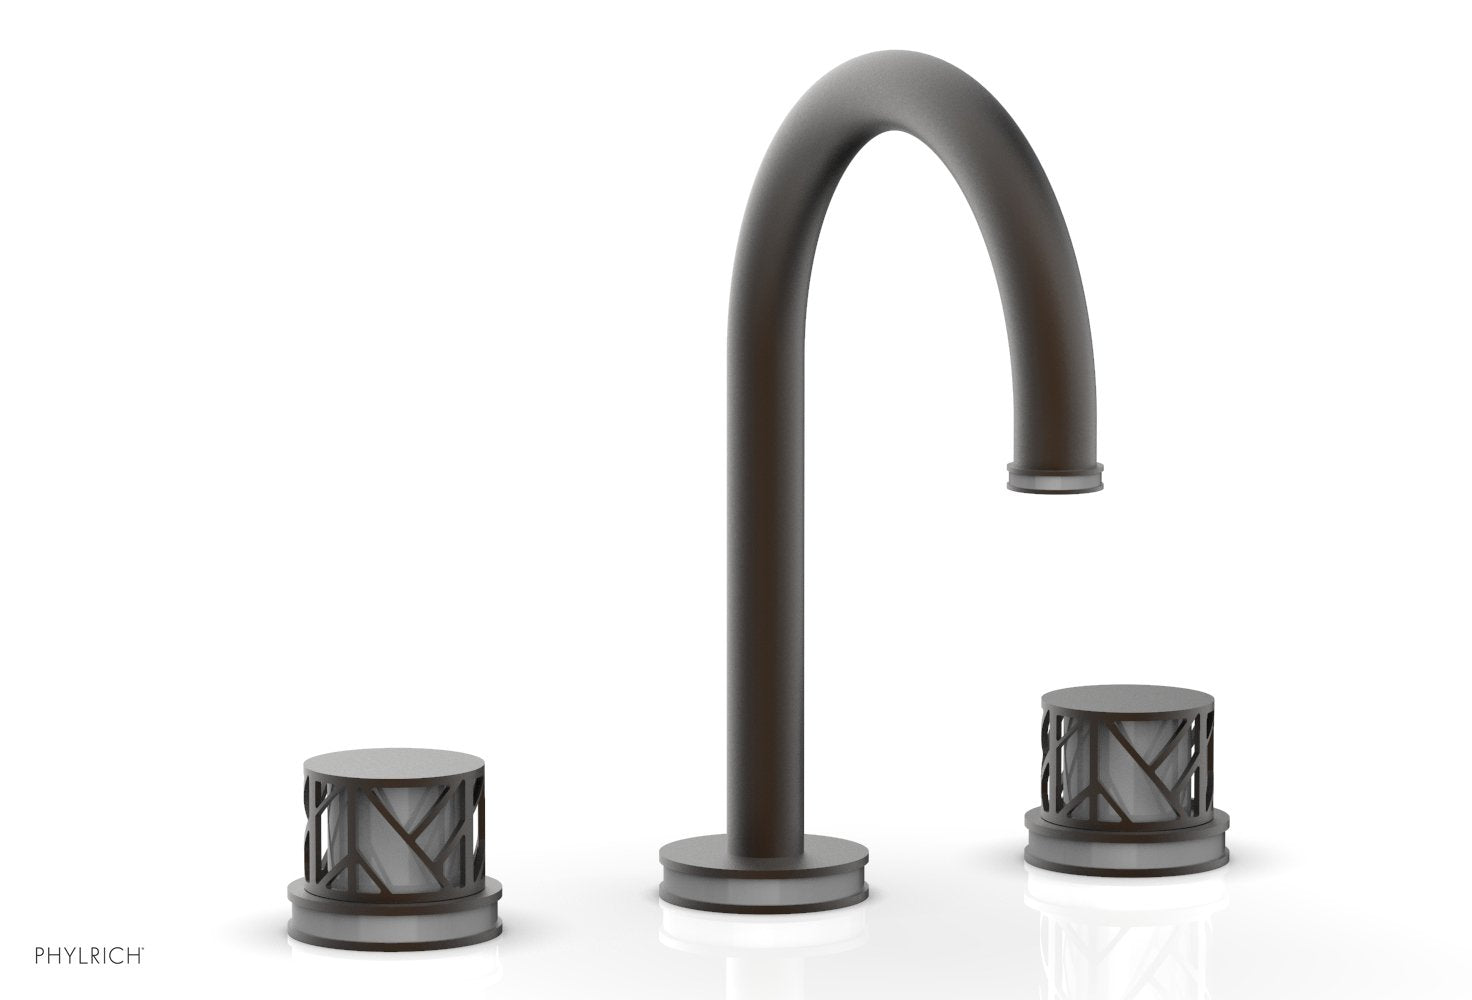 Phylrich JOLIE Widespread Faucet - Round Handles with "Grey" Accents